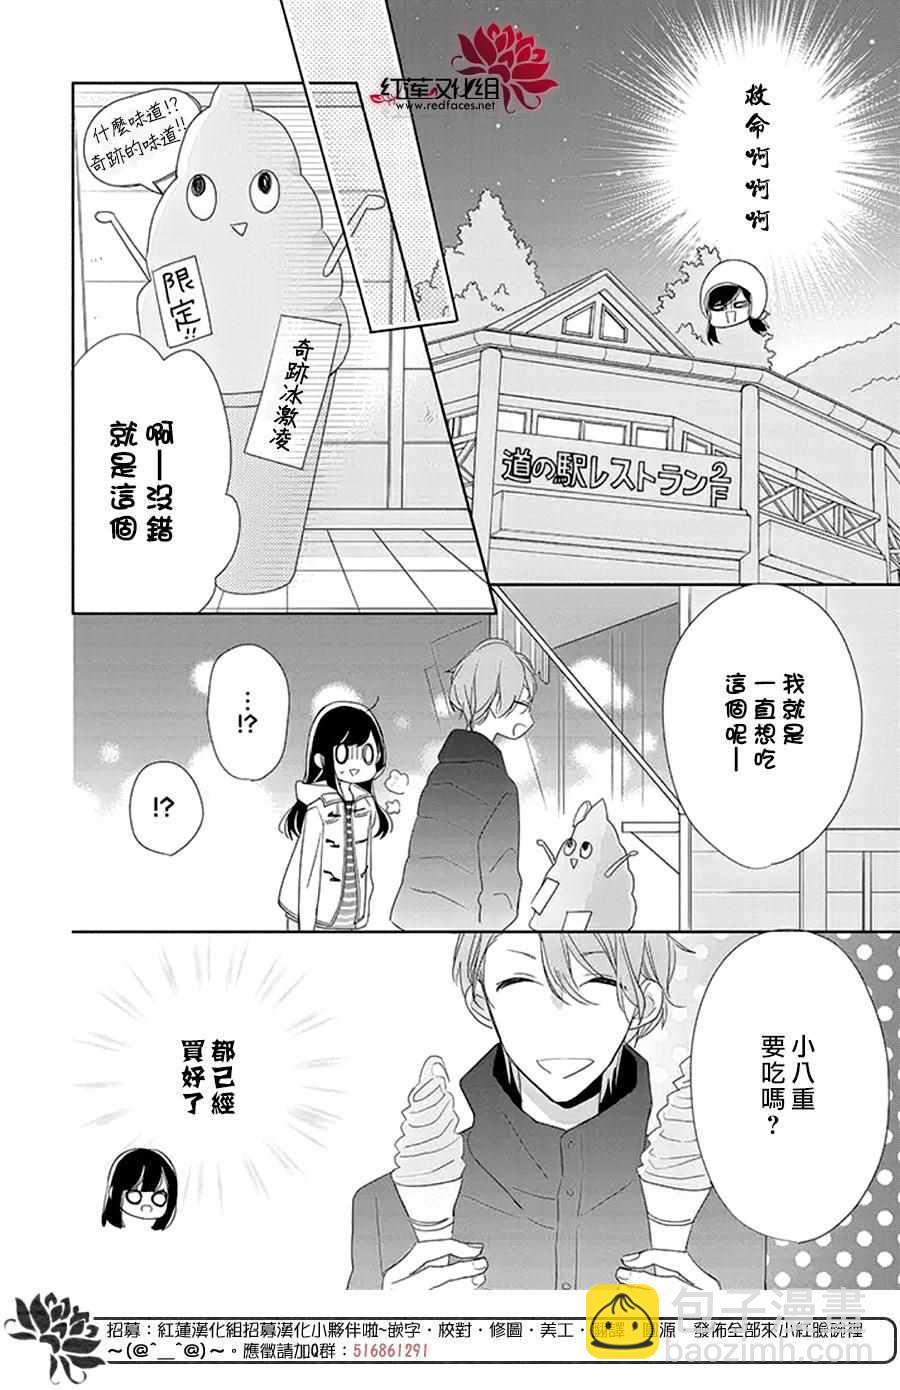 If given a second chance - 22話 - 4